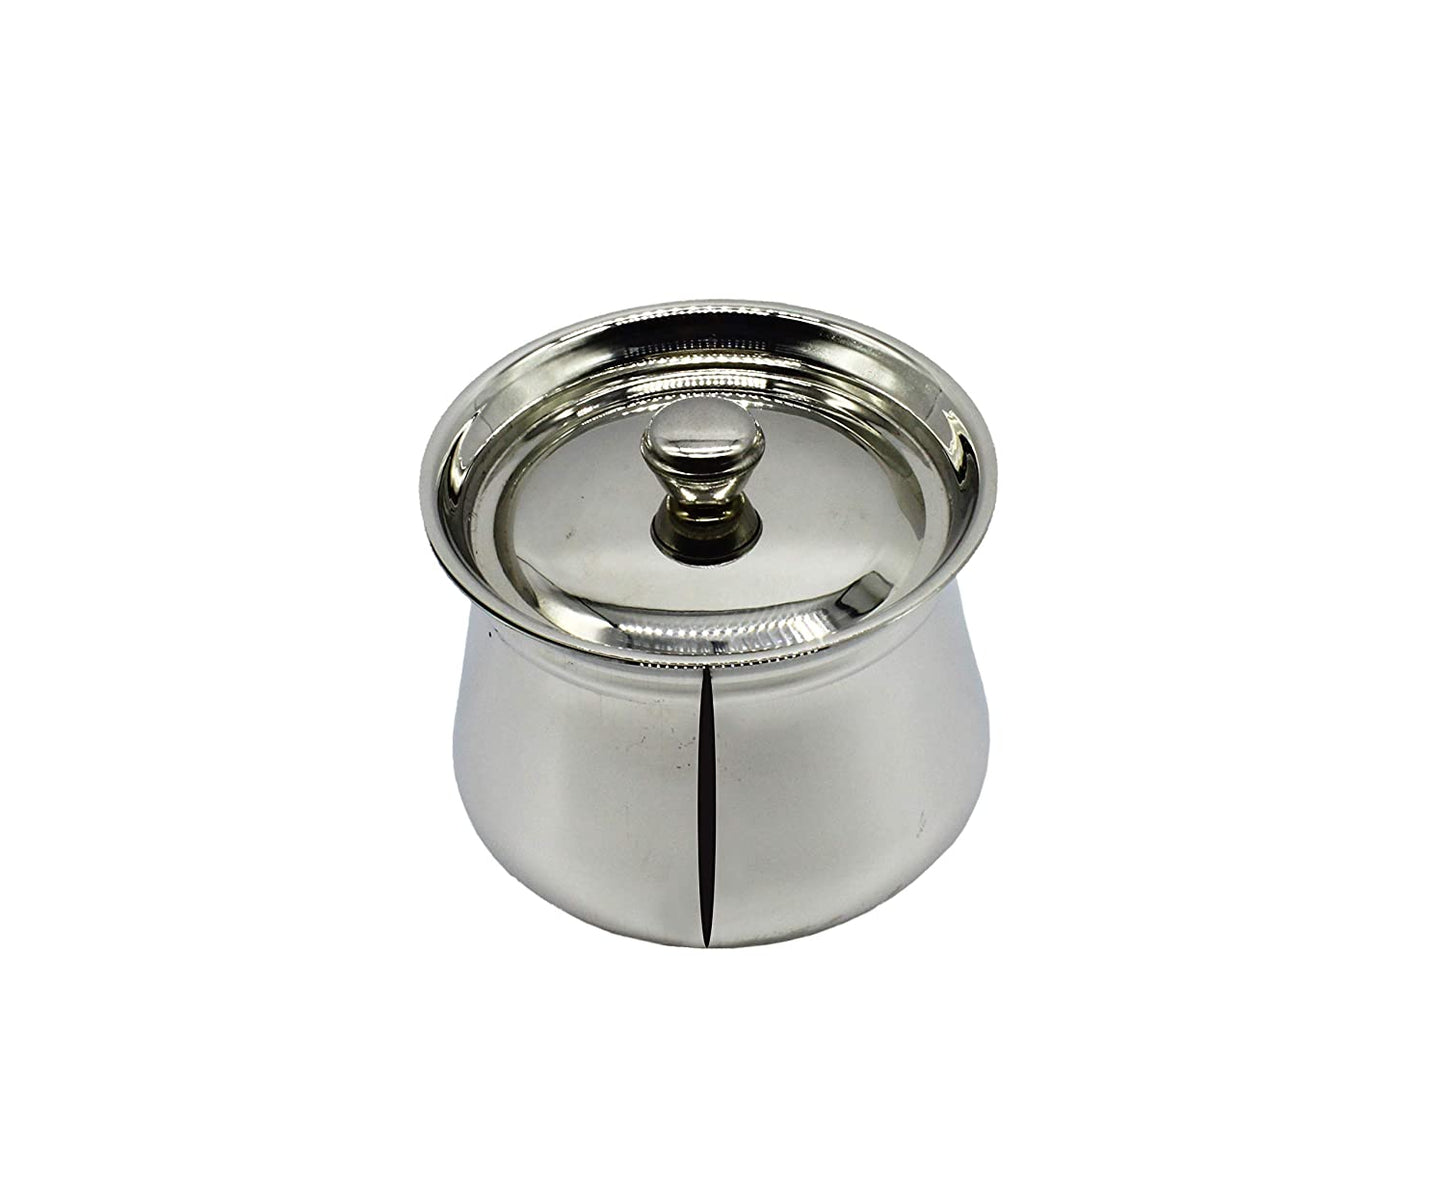 Stainless Steel Special Coil Handi Tall Serving Dish Pot Set of 3 Pcs - 10.5 cm, 12 cm, 14 cm